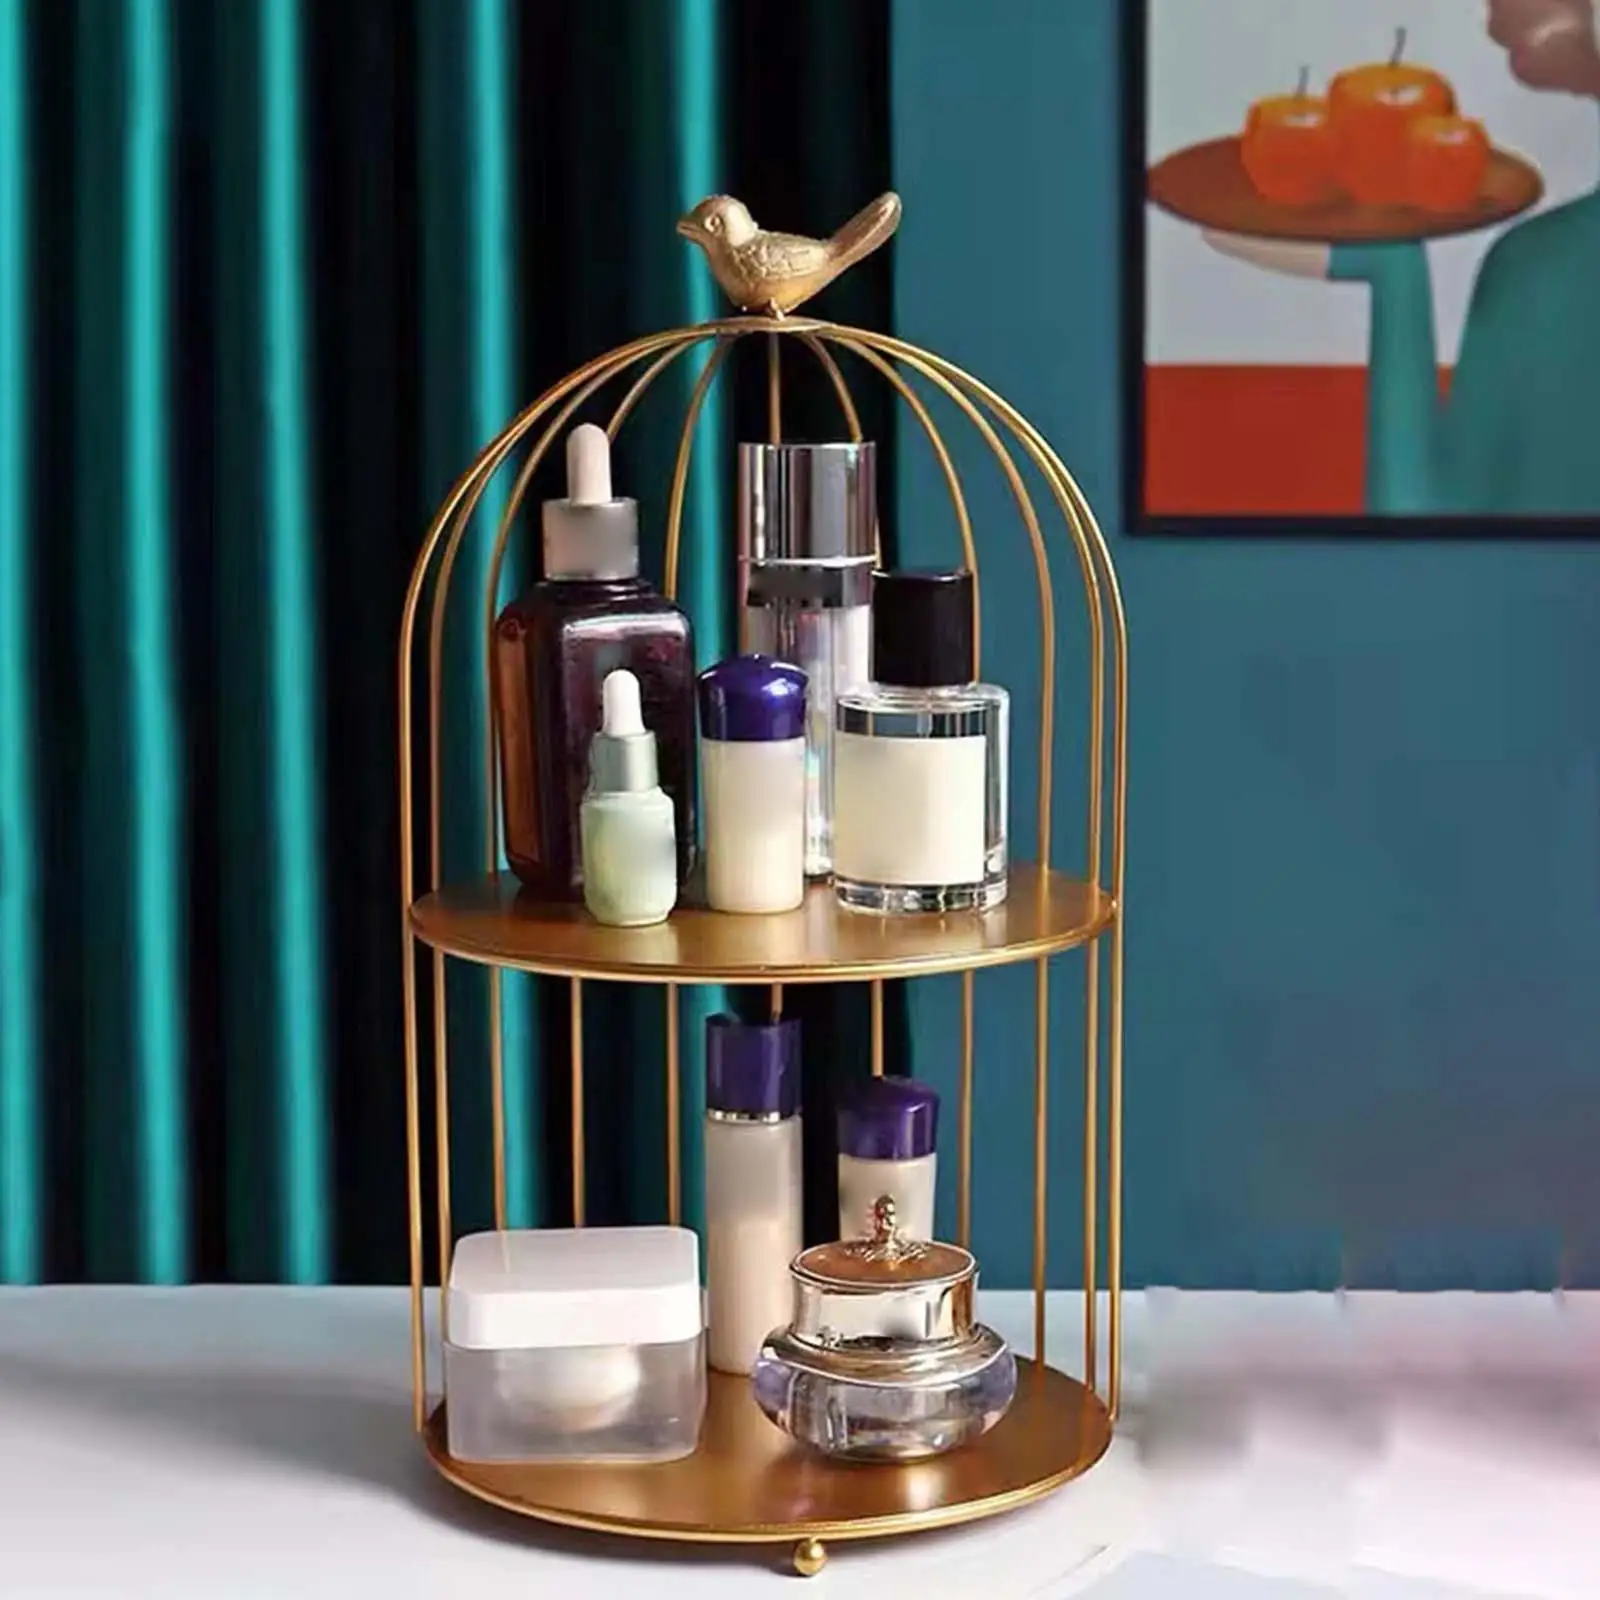 Nordic Metallic Bars Make up Bird Cage Storage Jewelry Holder Cosmetics Display Cupcake Stand for Dresser Girl Necklace Earring